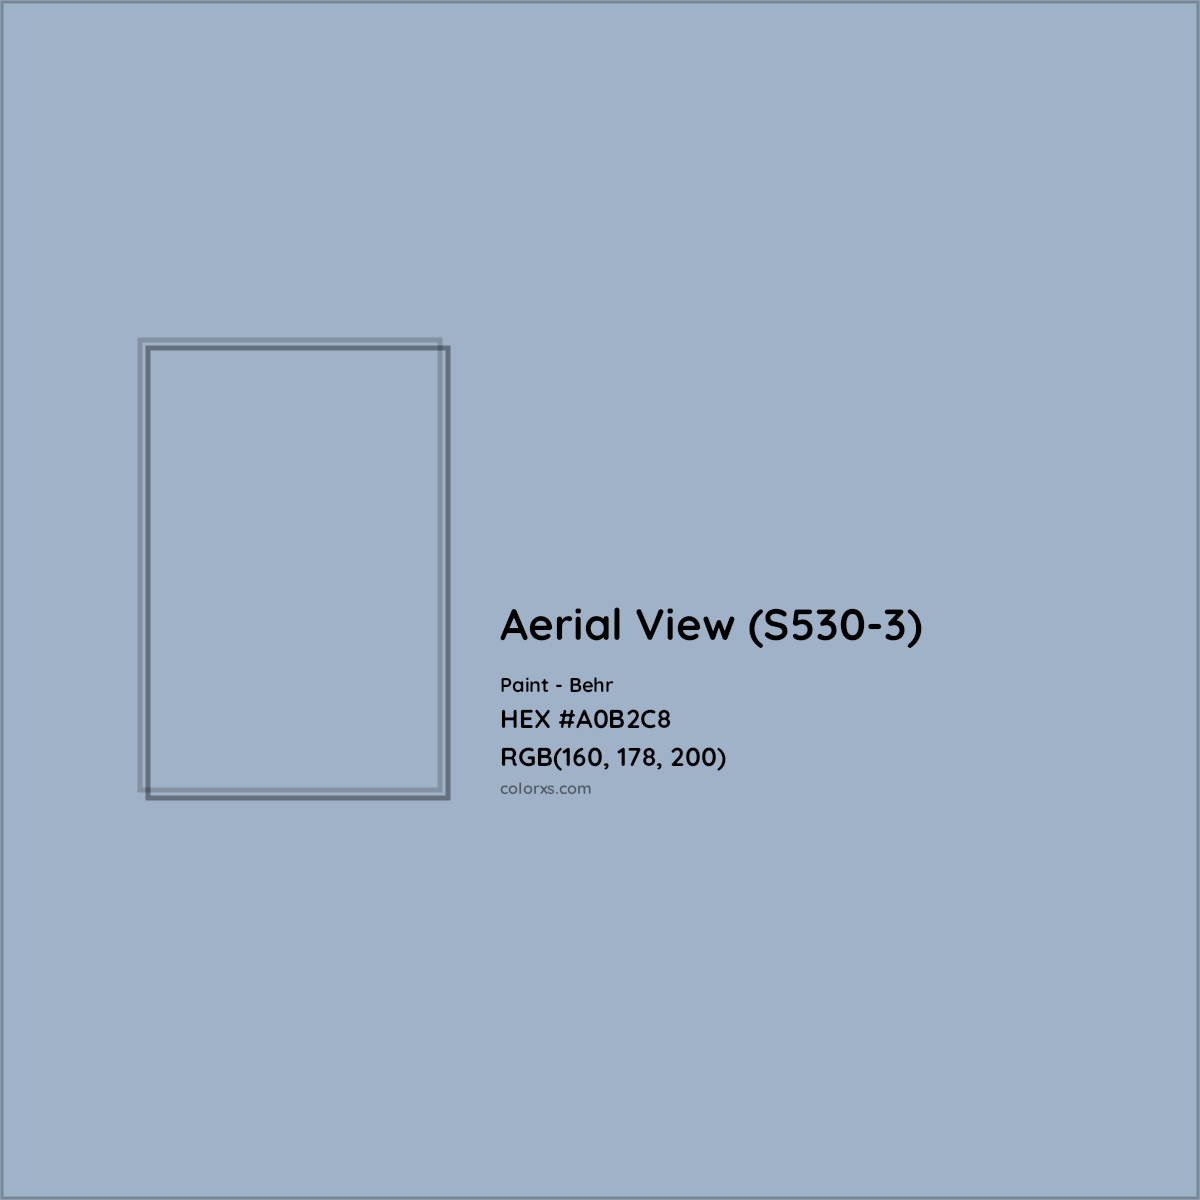 HEX #A0B2C8 Aerial View (S530-3) Paint Behr - Color Code